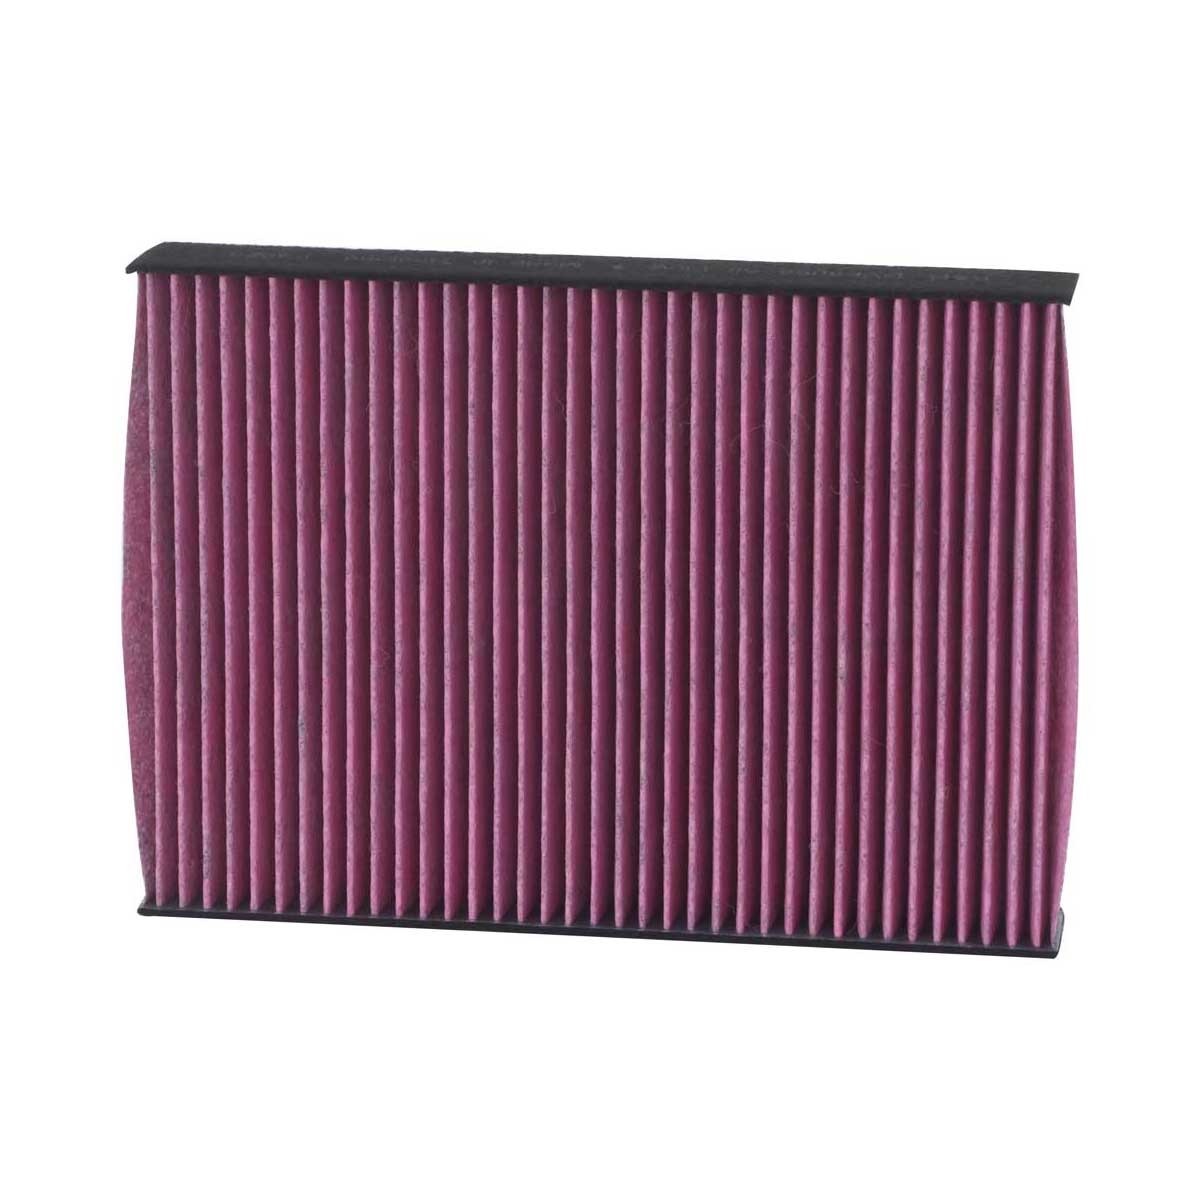 K&N Filters DVF5063 Pollen filter Activated Carbon Filter, 250 mm x 35 mm, Square